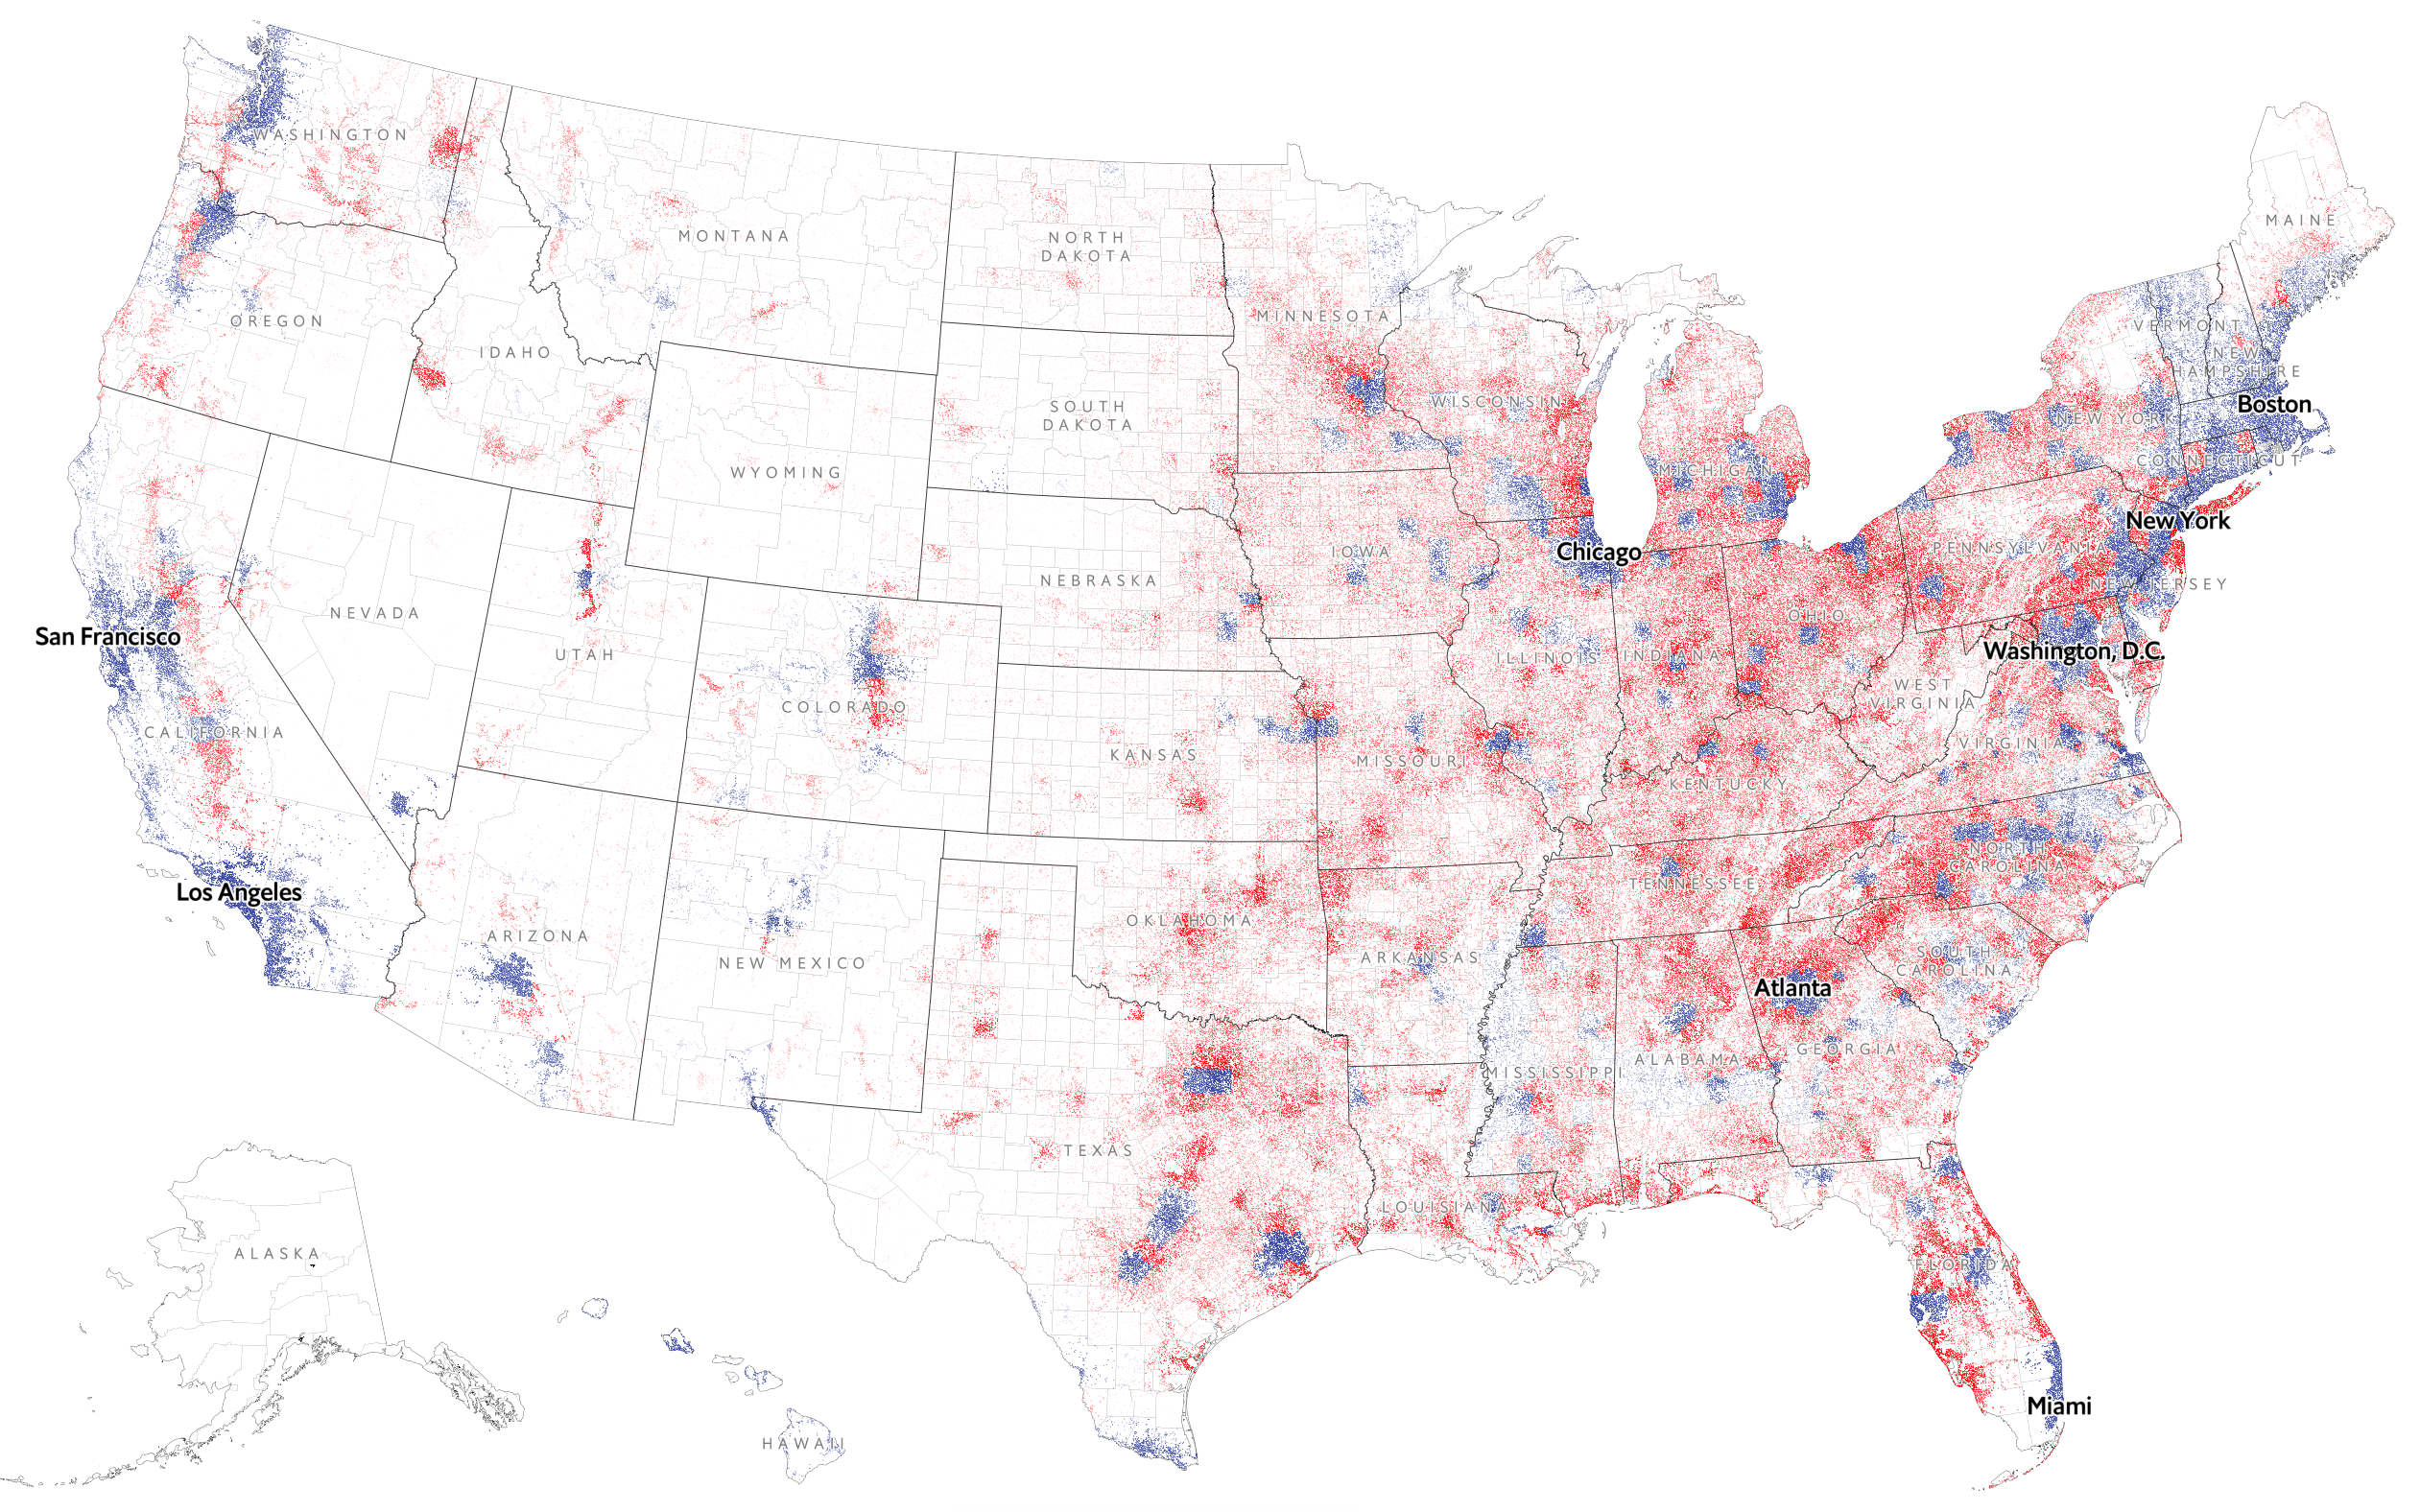  US 2020 election results